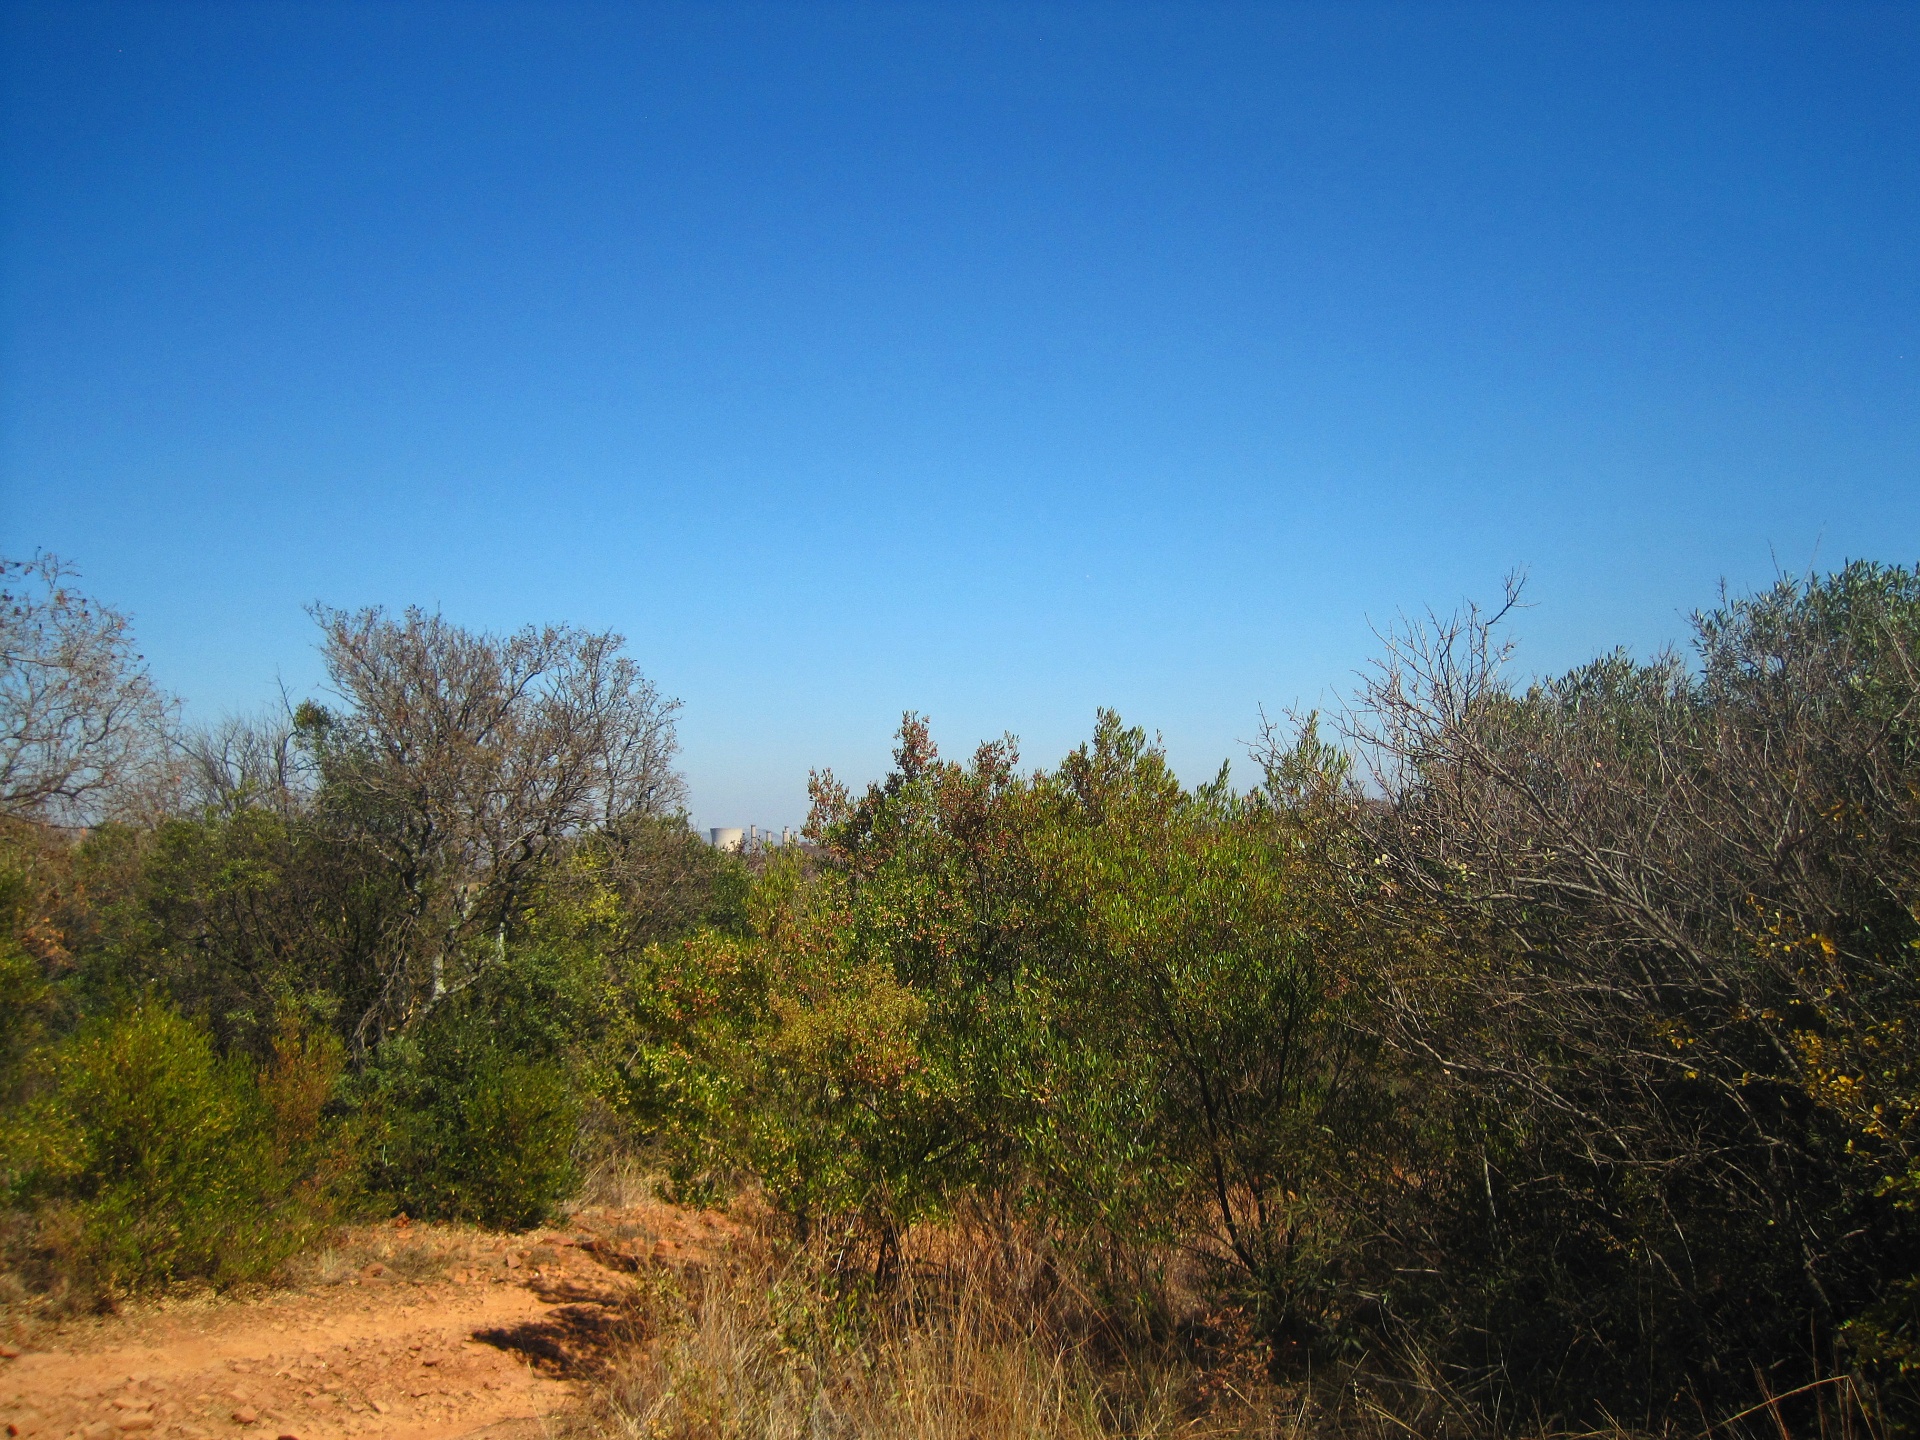 view of dense bush in a south african landscape